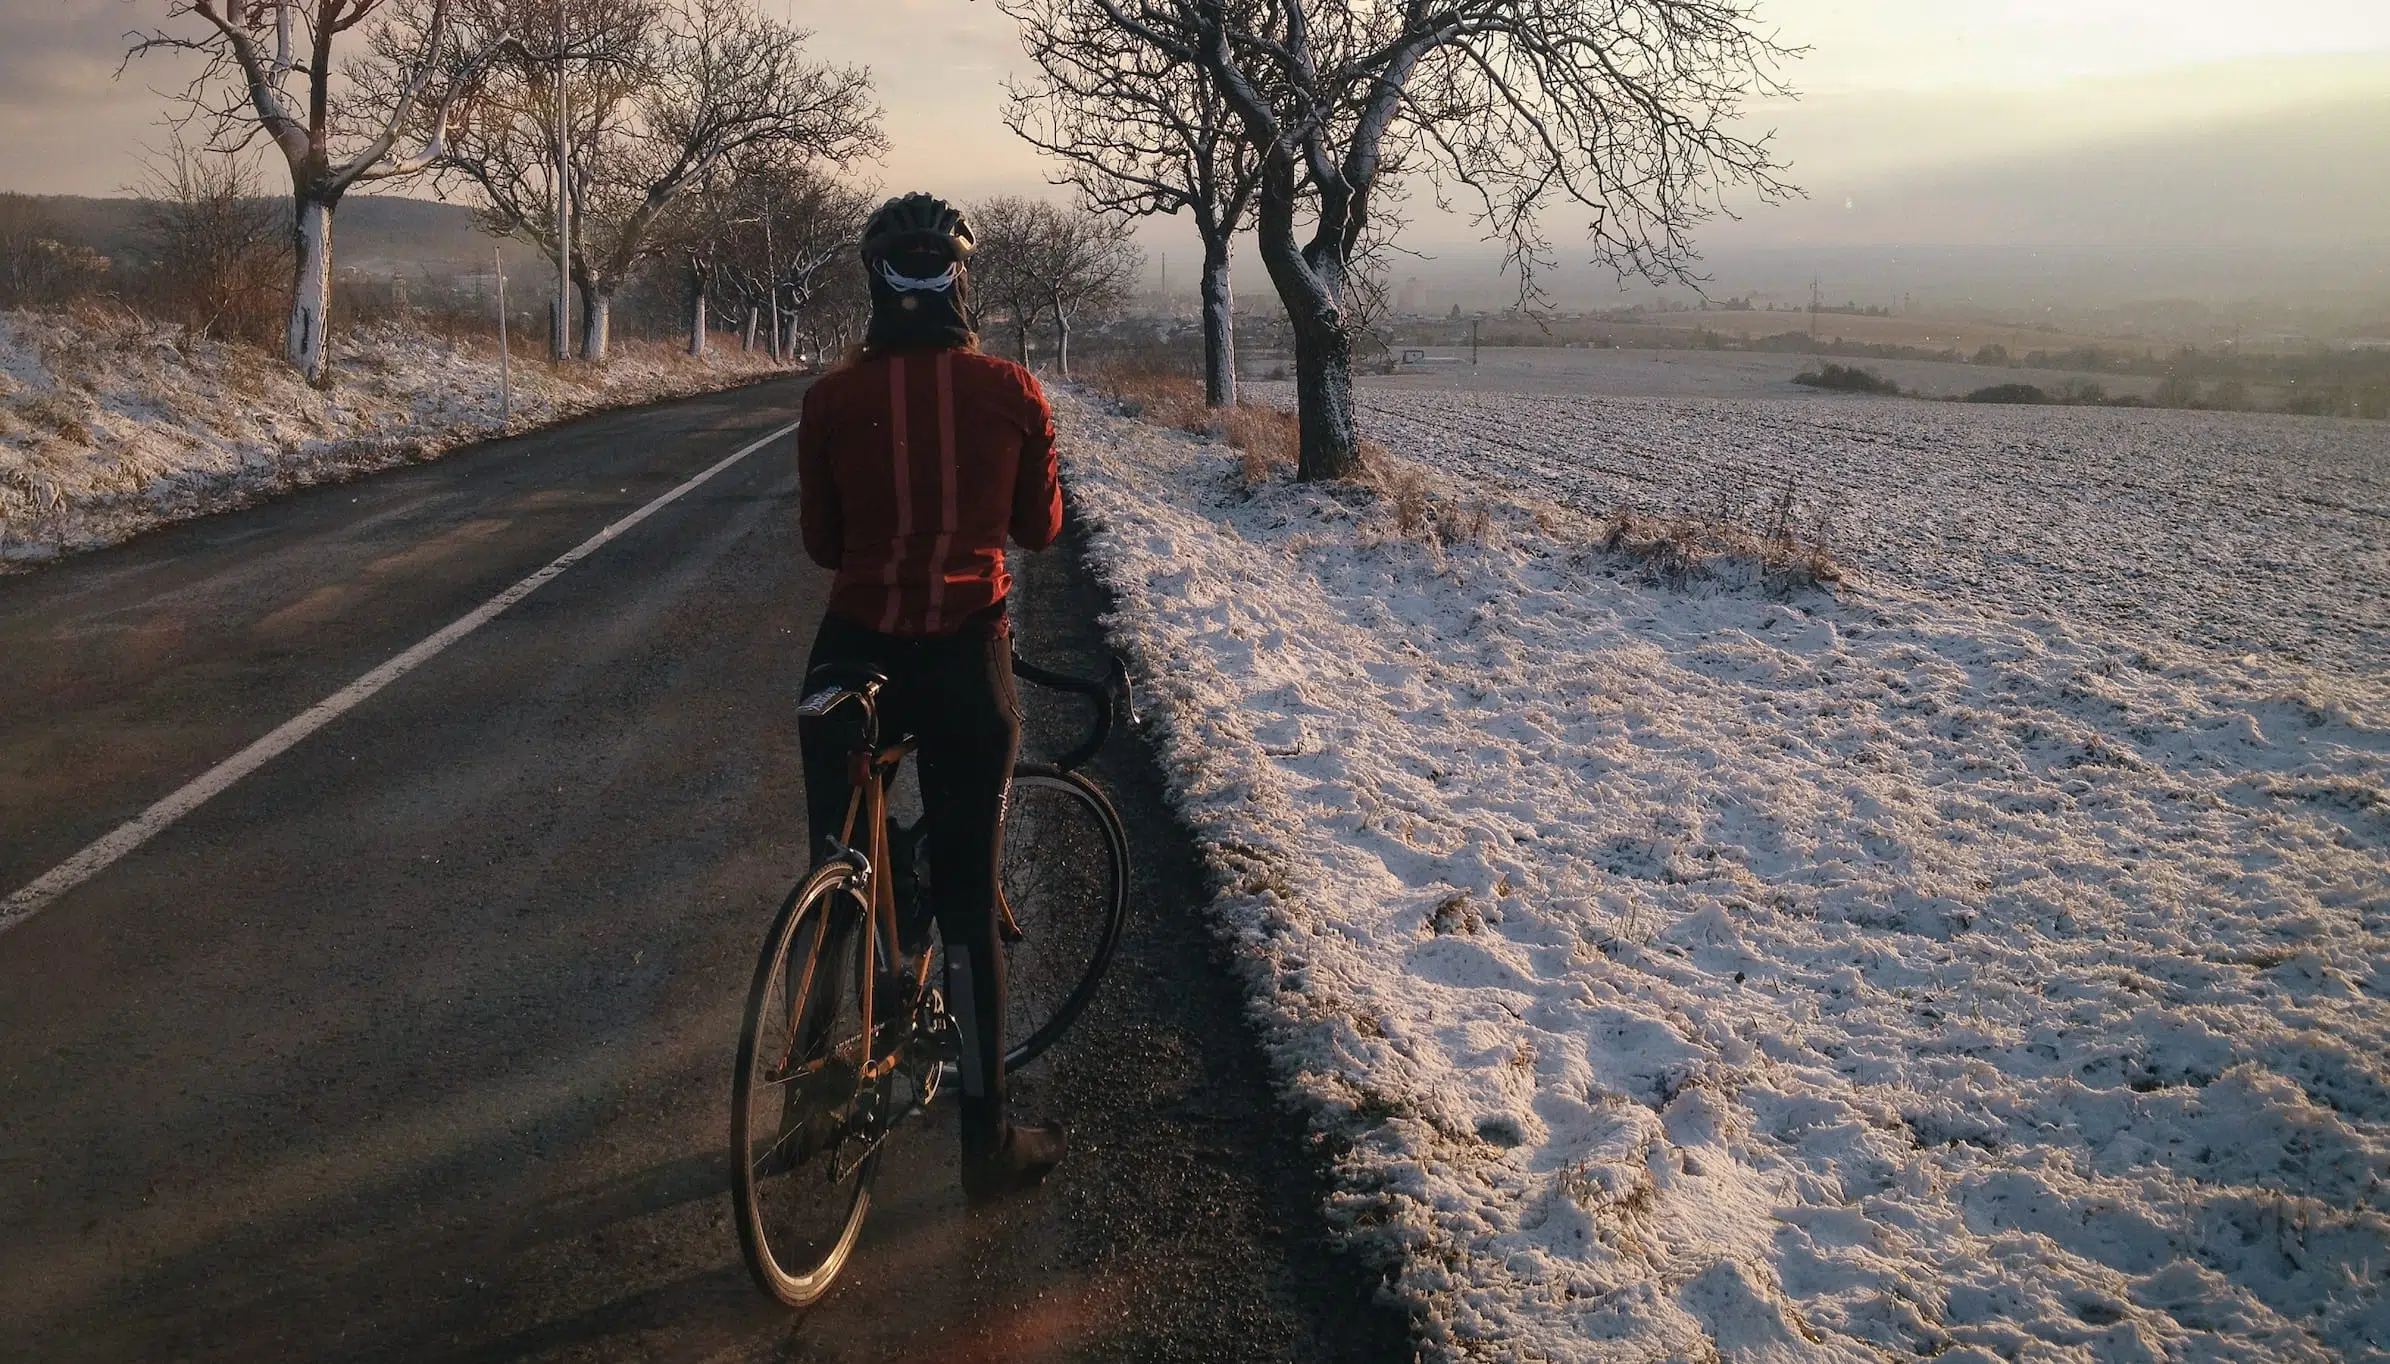 Cyclist riding on road surrounded by snow